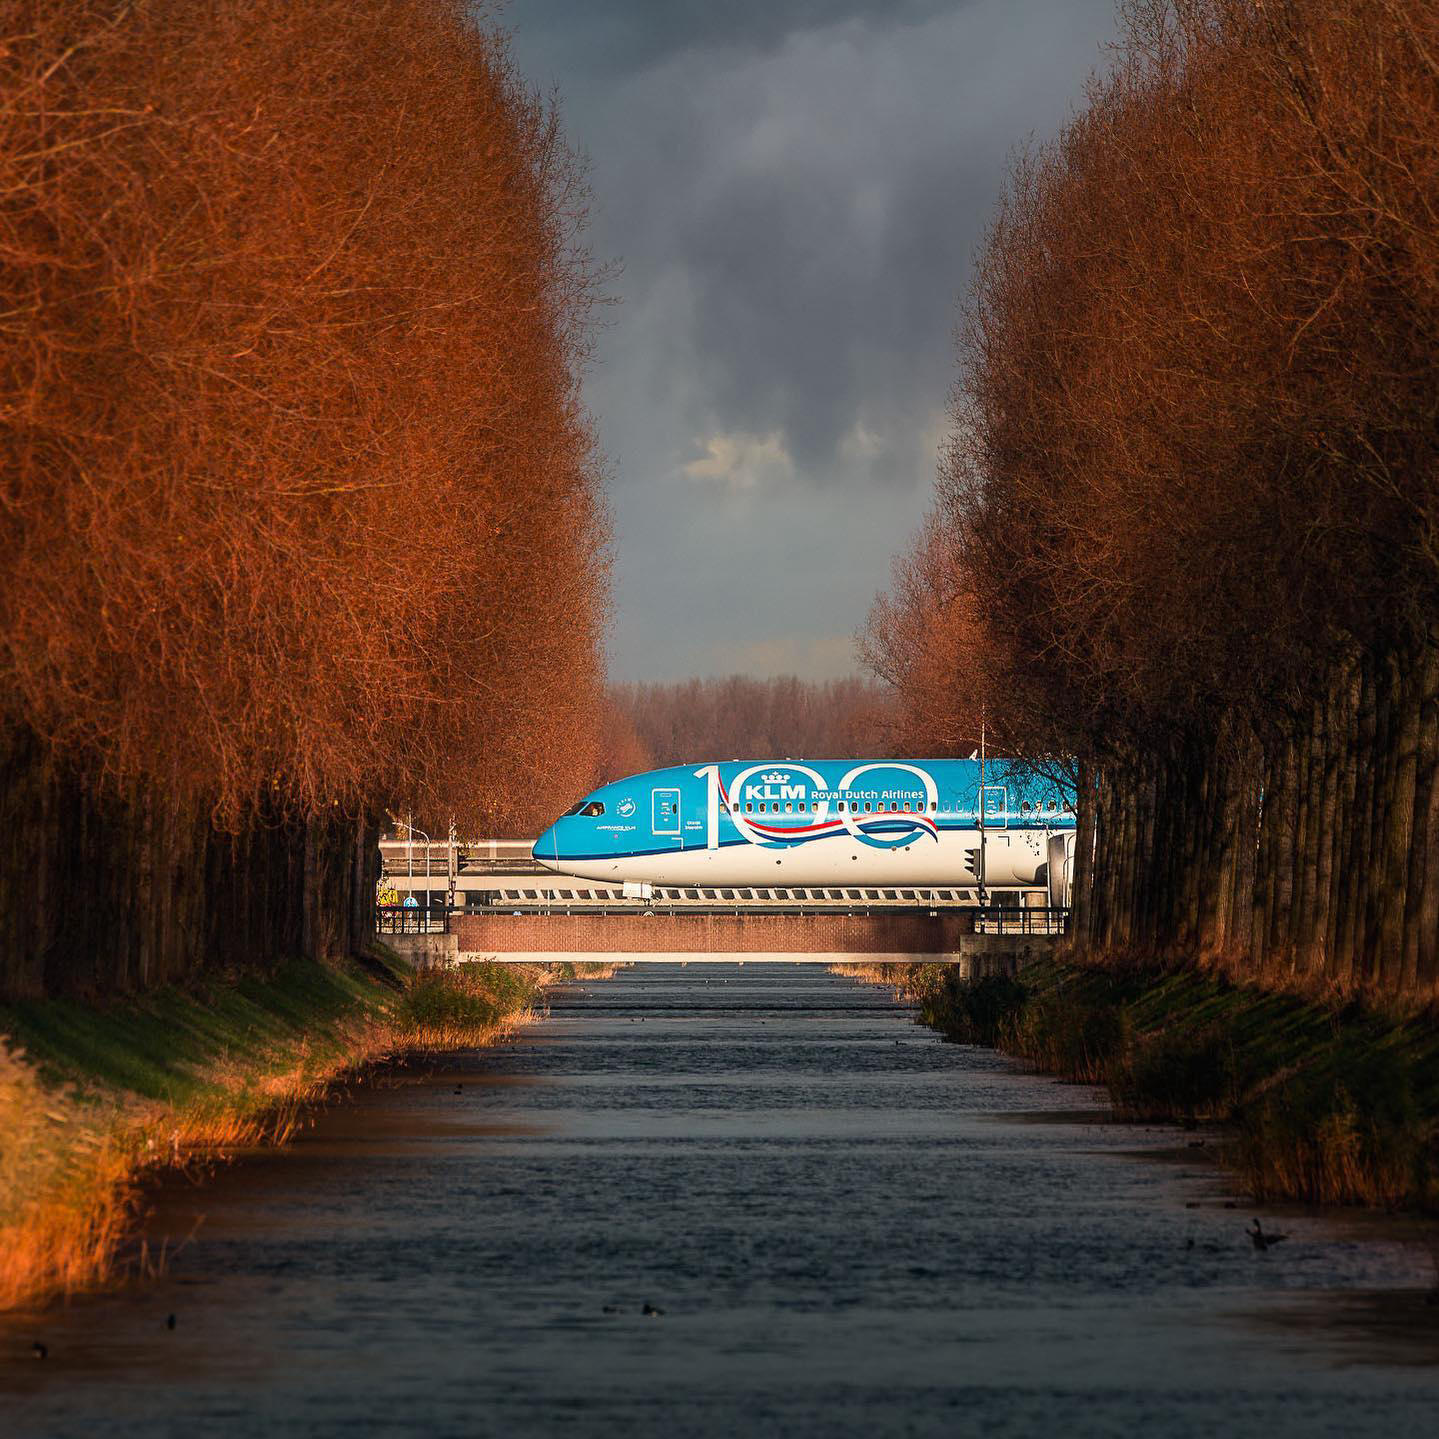 image  1 KLM Royal Dutch Airlines - Here in the Netherlands autumn is right around the corner